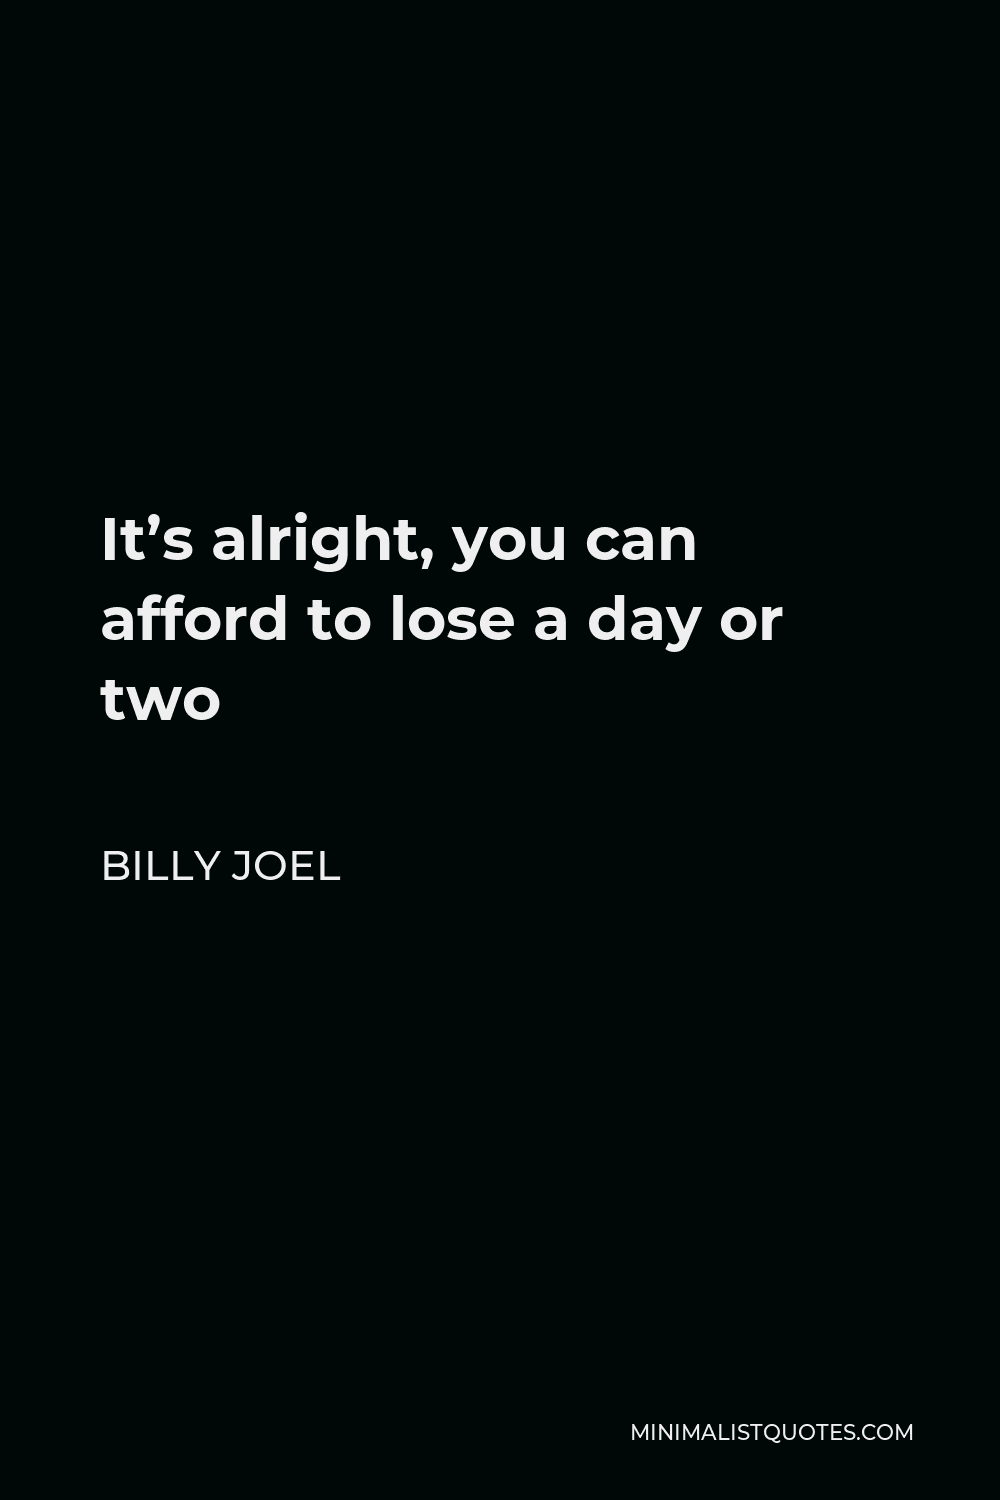 Billy Joel Quote - It’s alright, you can afford to lose a day or two